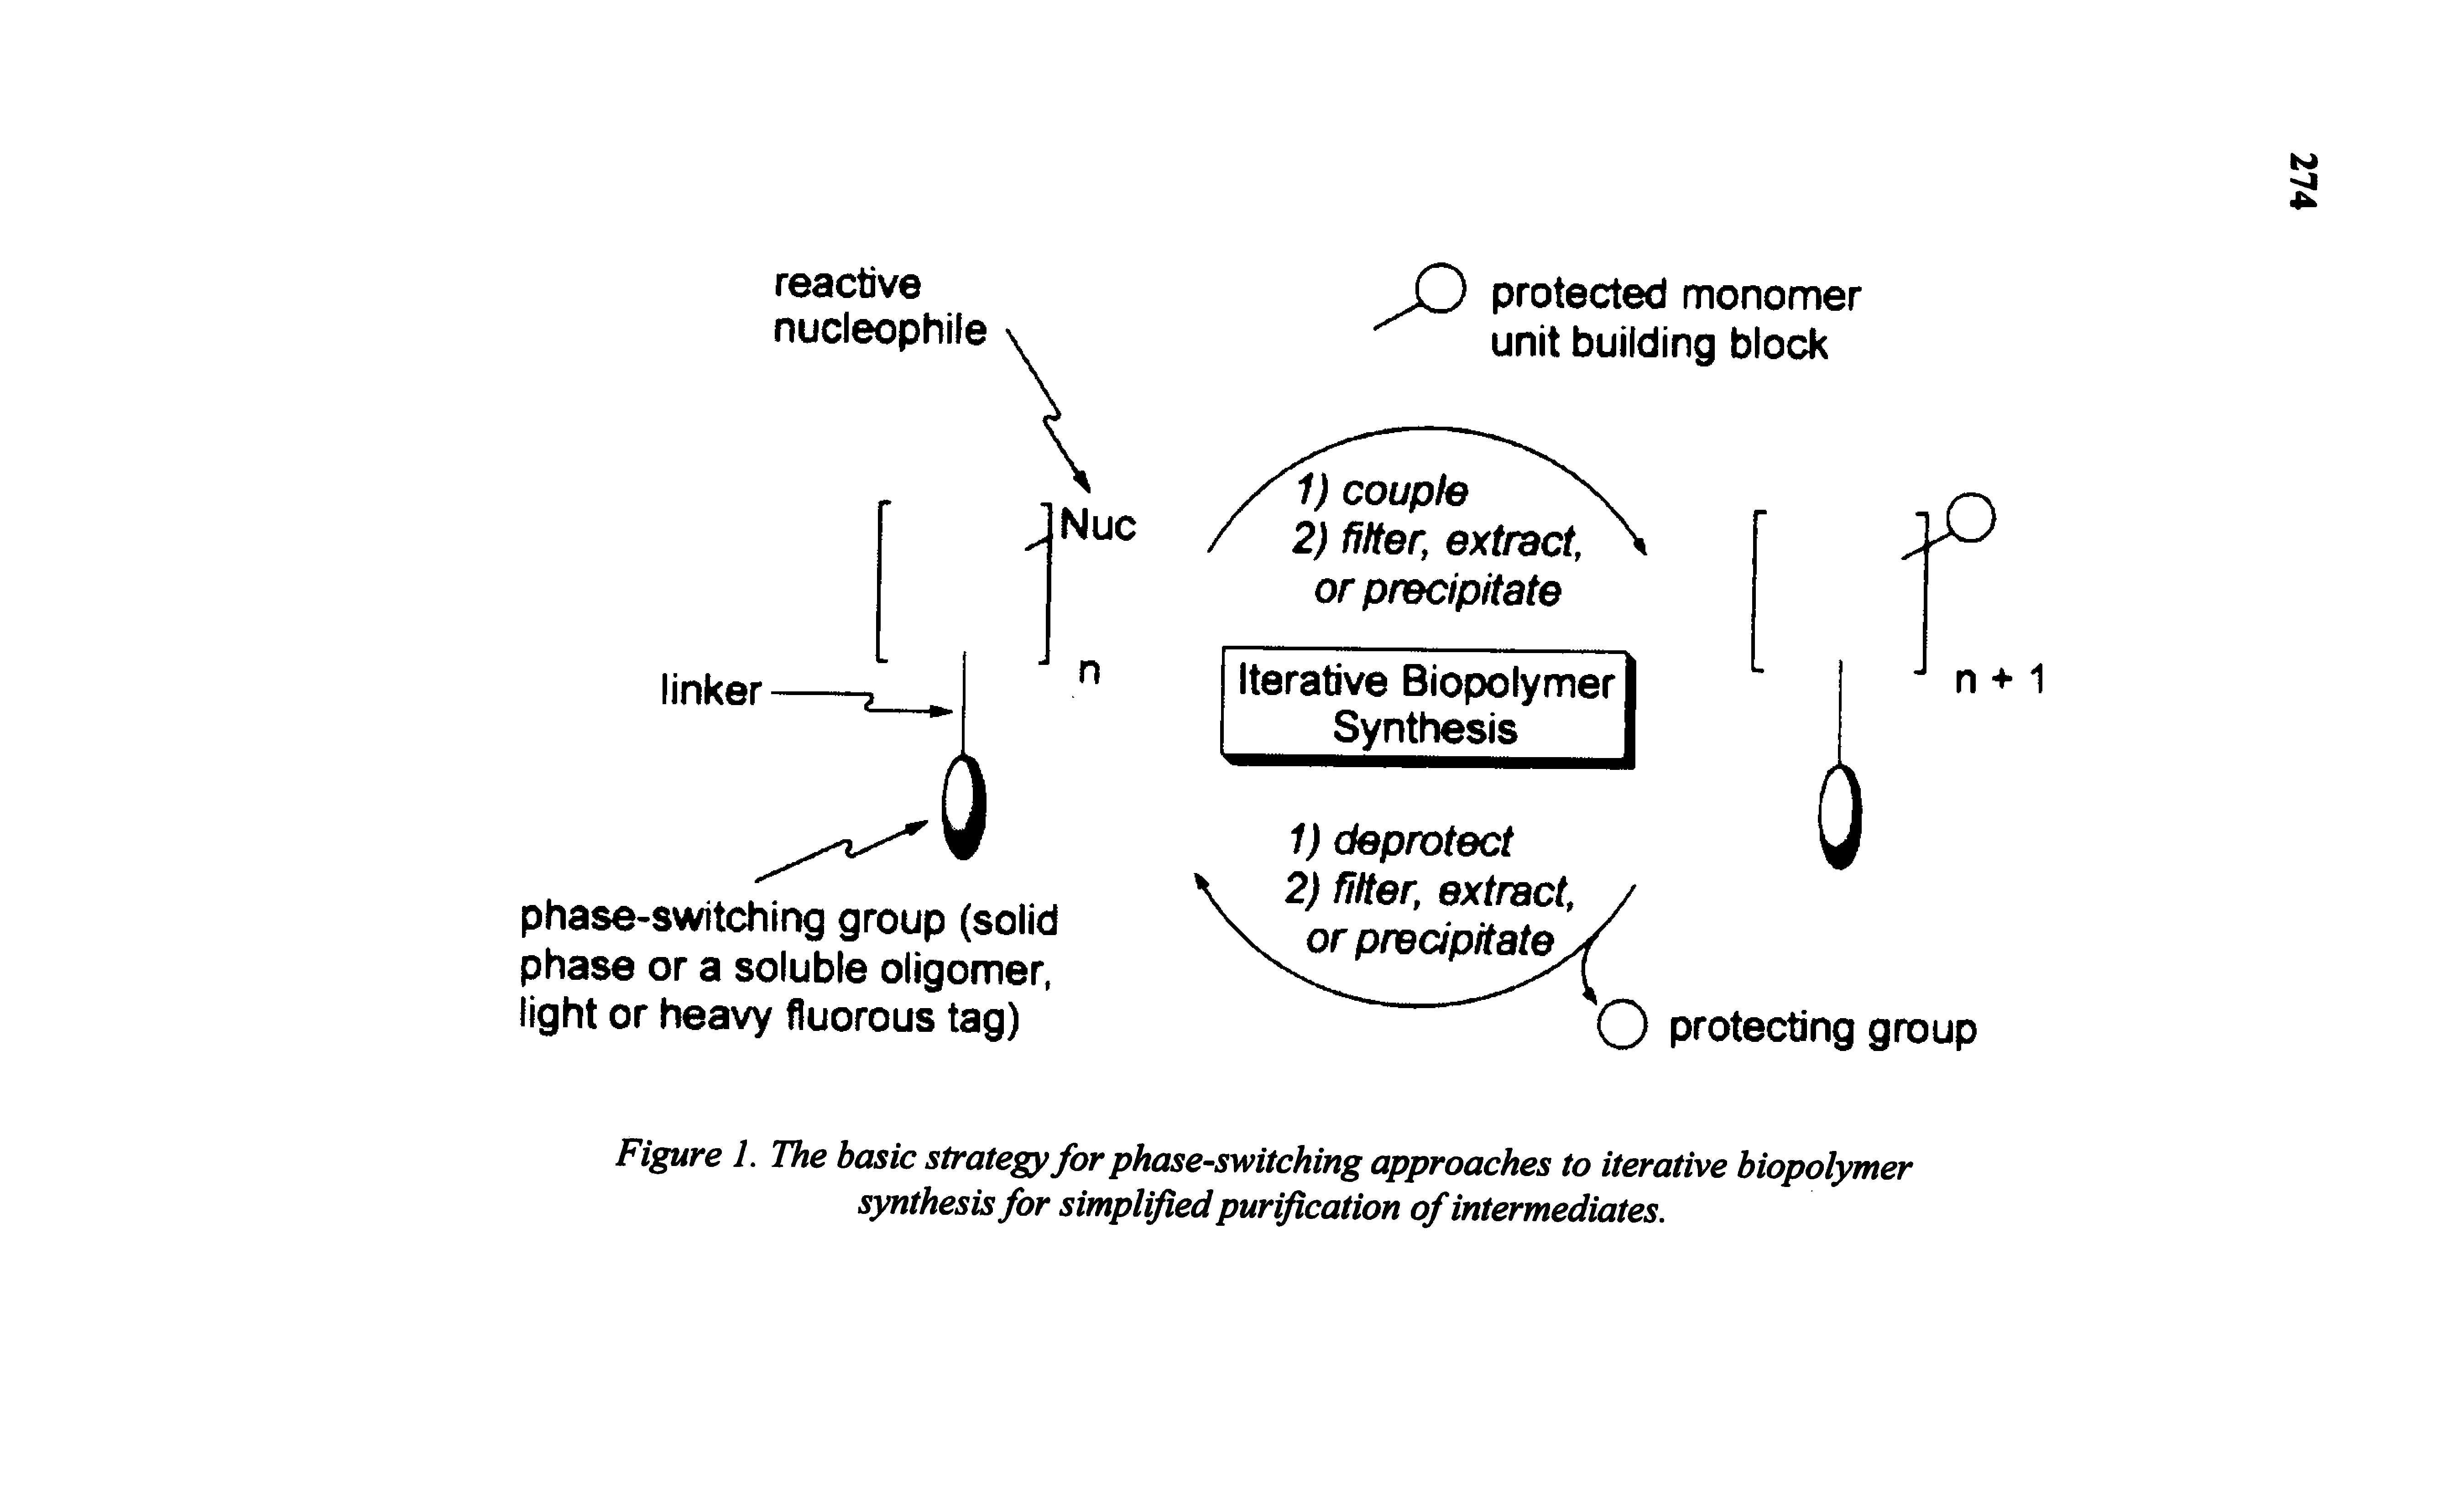 Figure 1. The basic strategy for phase-switching approaches to iterative biopolymer synthesis for simplified purification of intermediates.